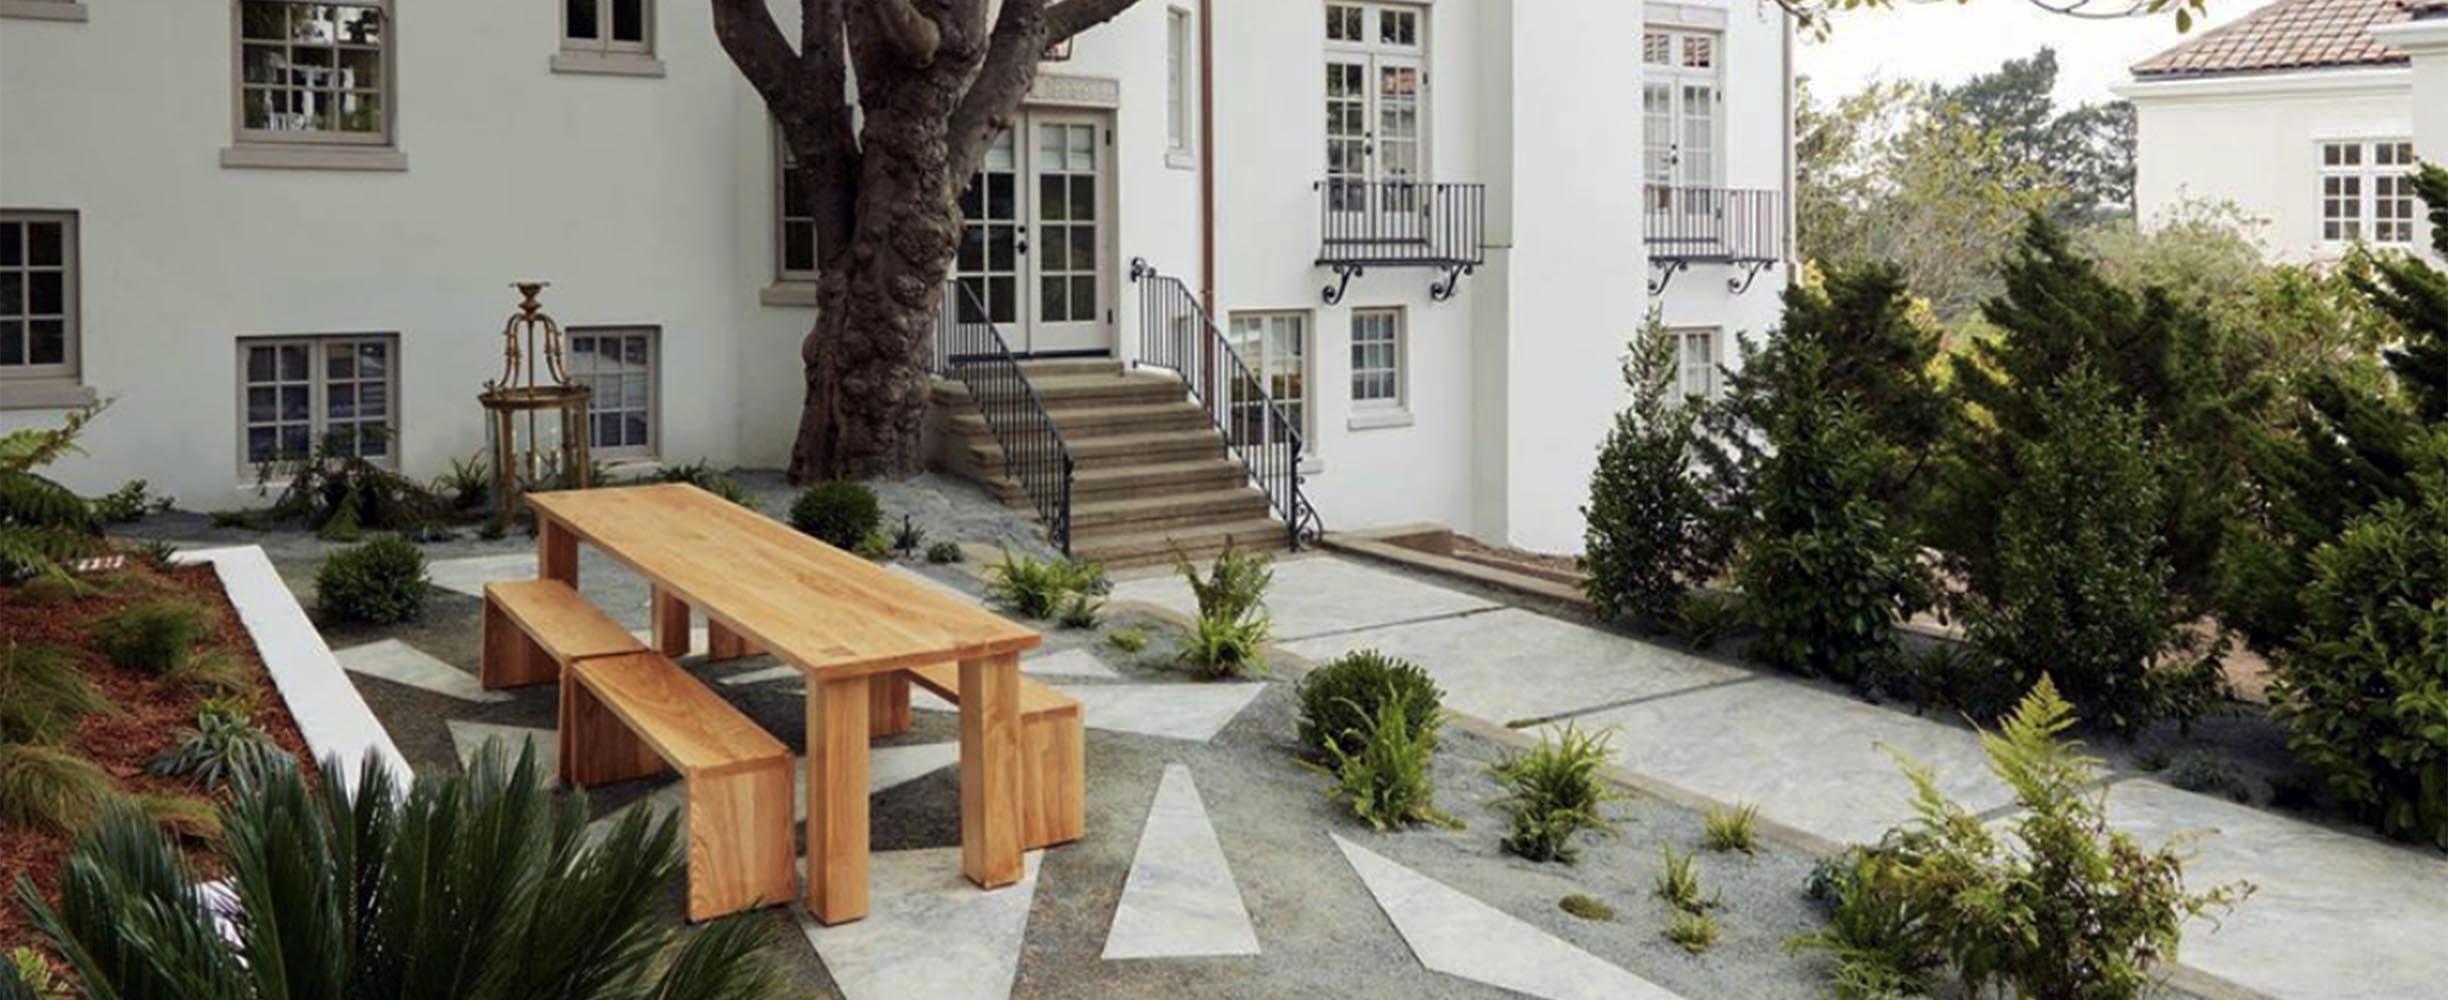 Professional patio landscaping design and implementation of modern grill, table and foreplace for classic San Francisco building.